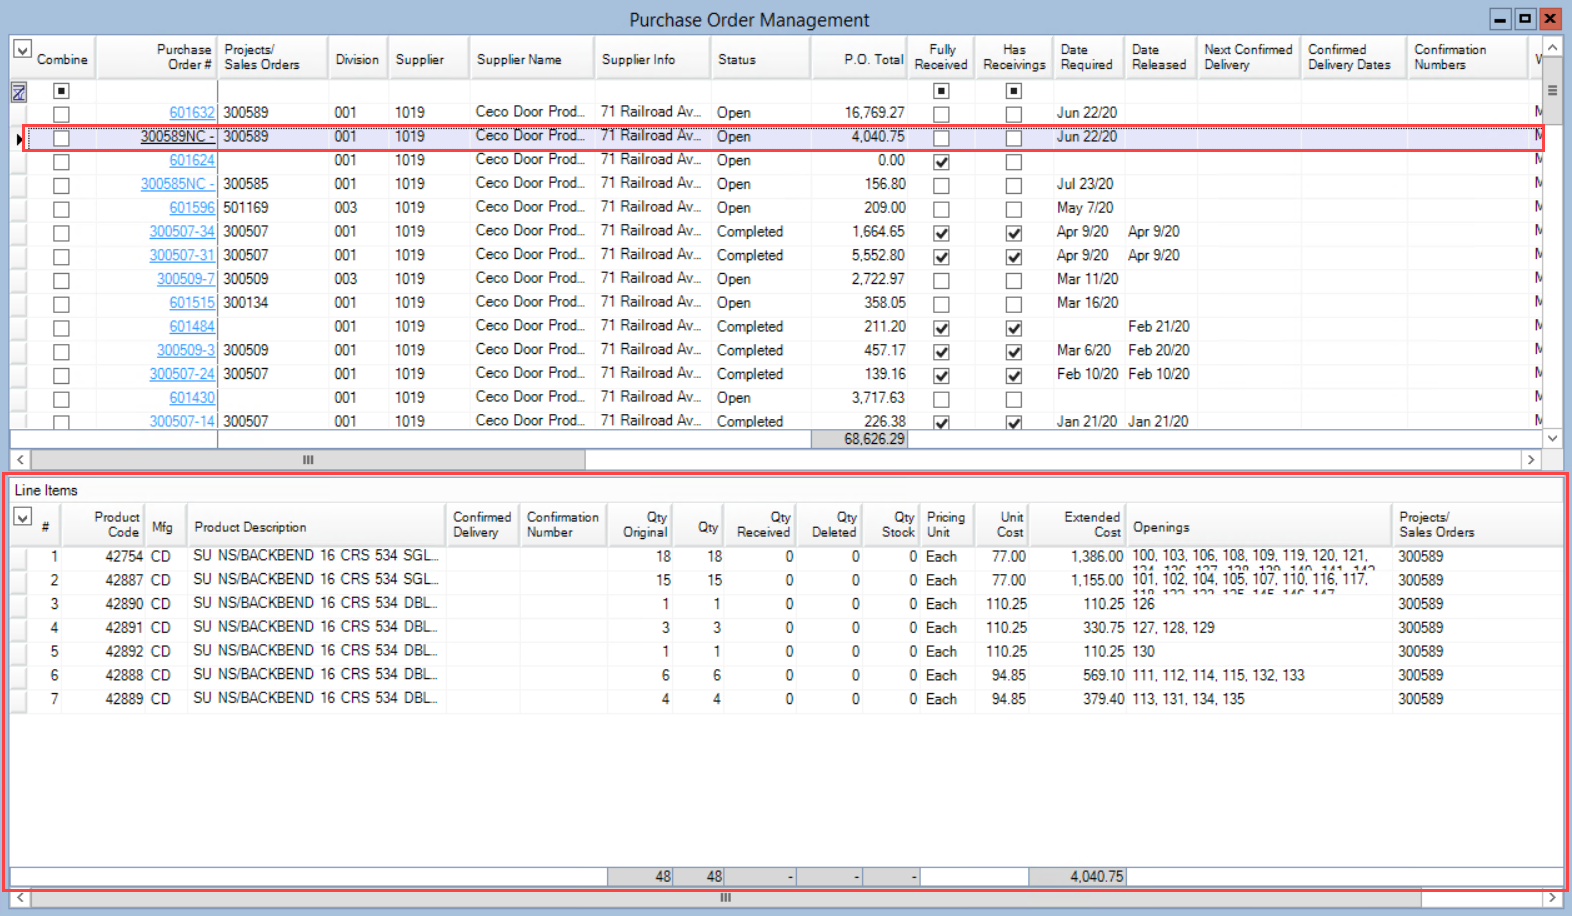 Purchase Order Management windowl shows a selected purchase order in the top pane and the product line items in the bottom pane.